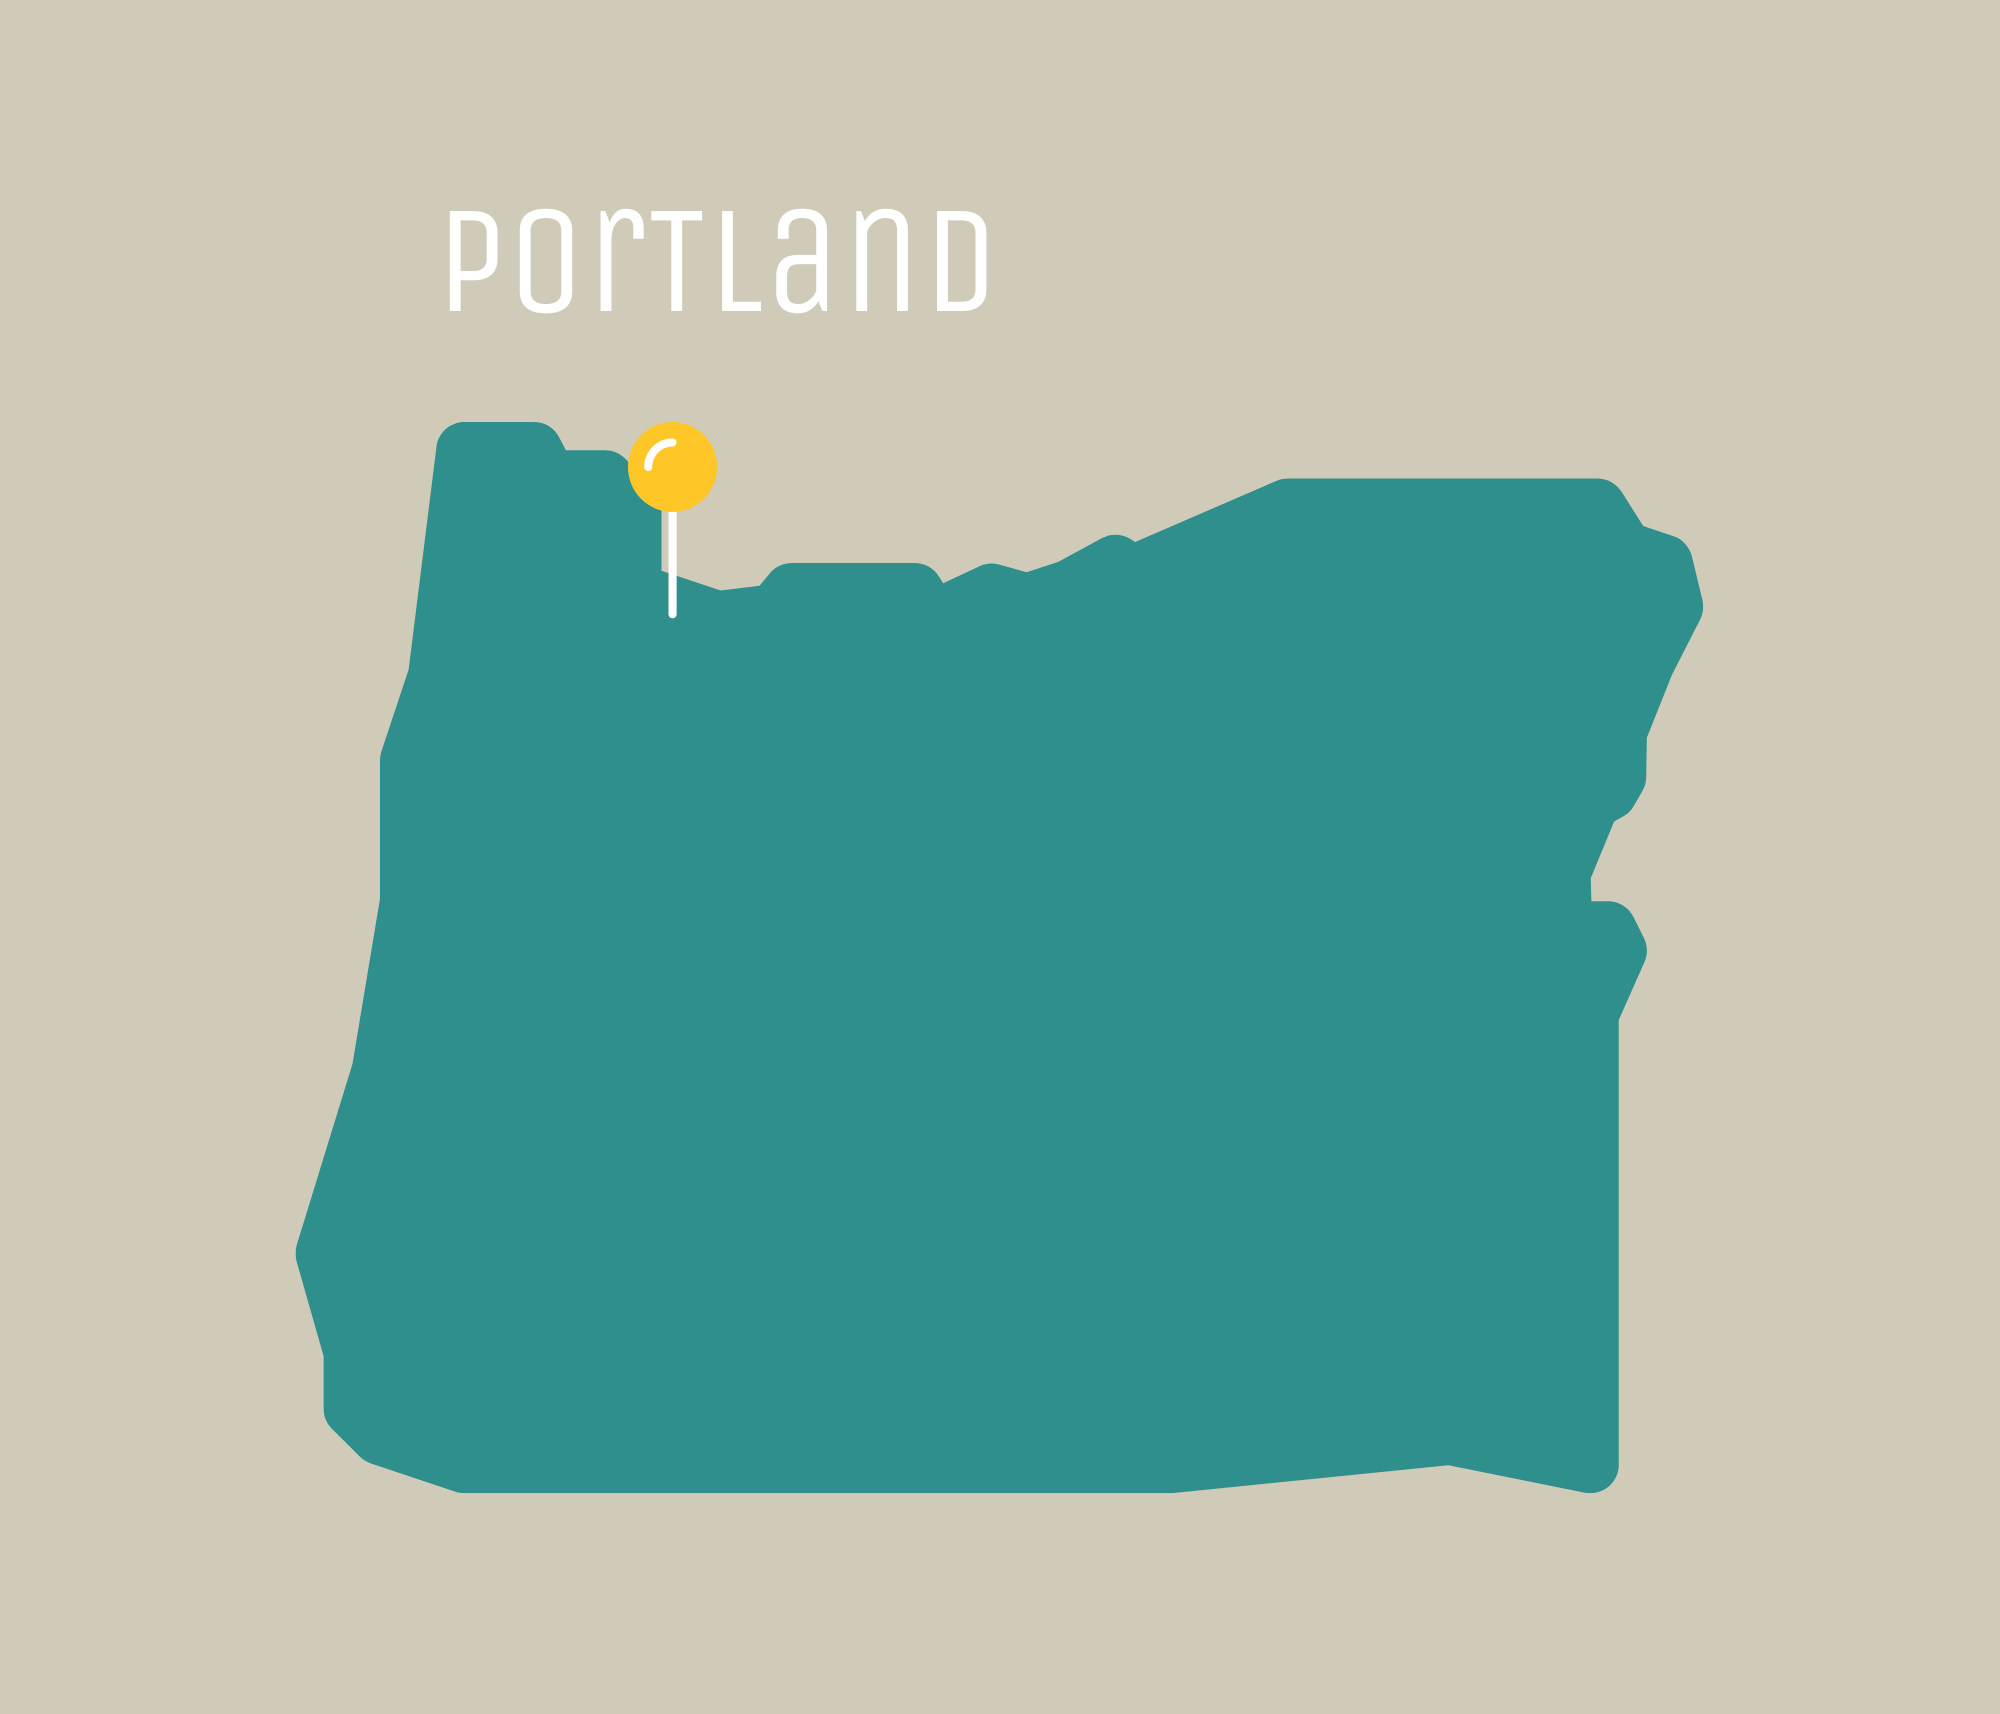 Yellow pin in the state of Oregon where Portland is